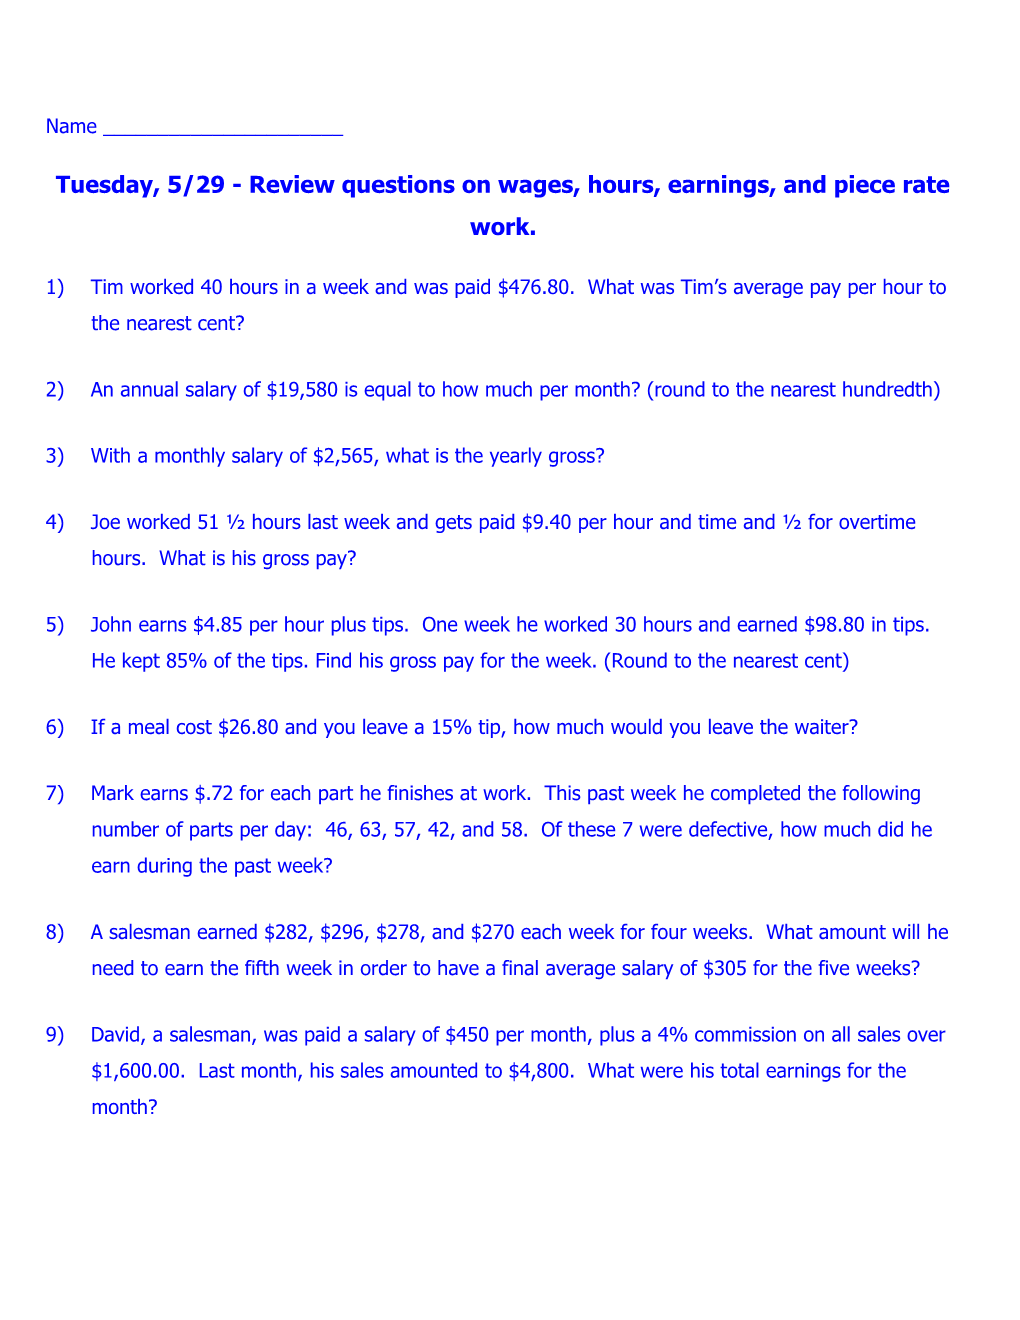 Tuesday, 5/29 - Review Questions on Wages, Hours, Earnings, and Piece Rate Work